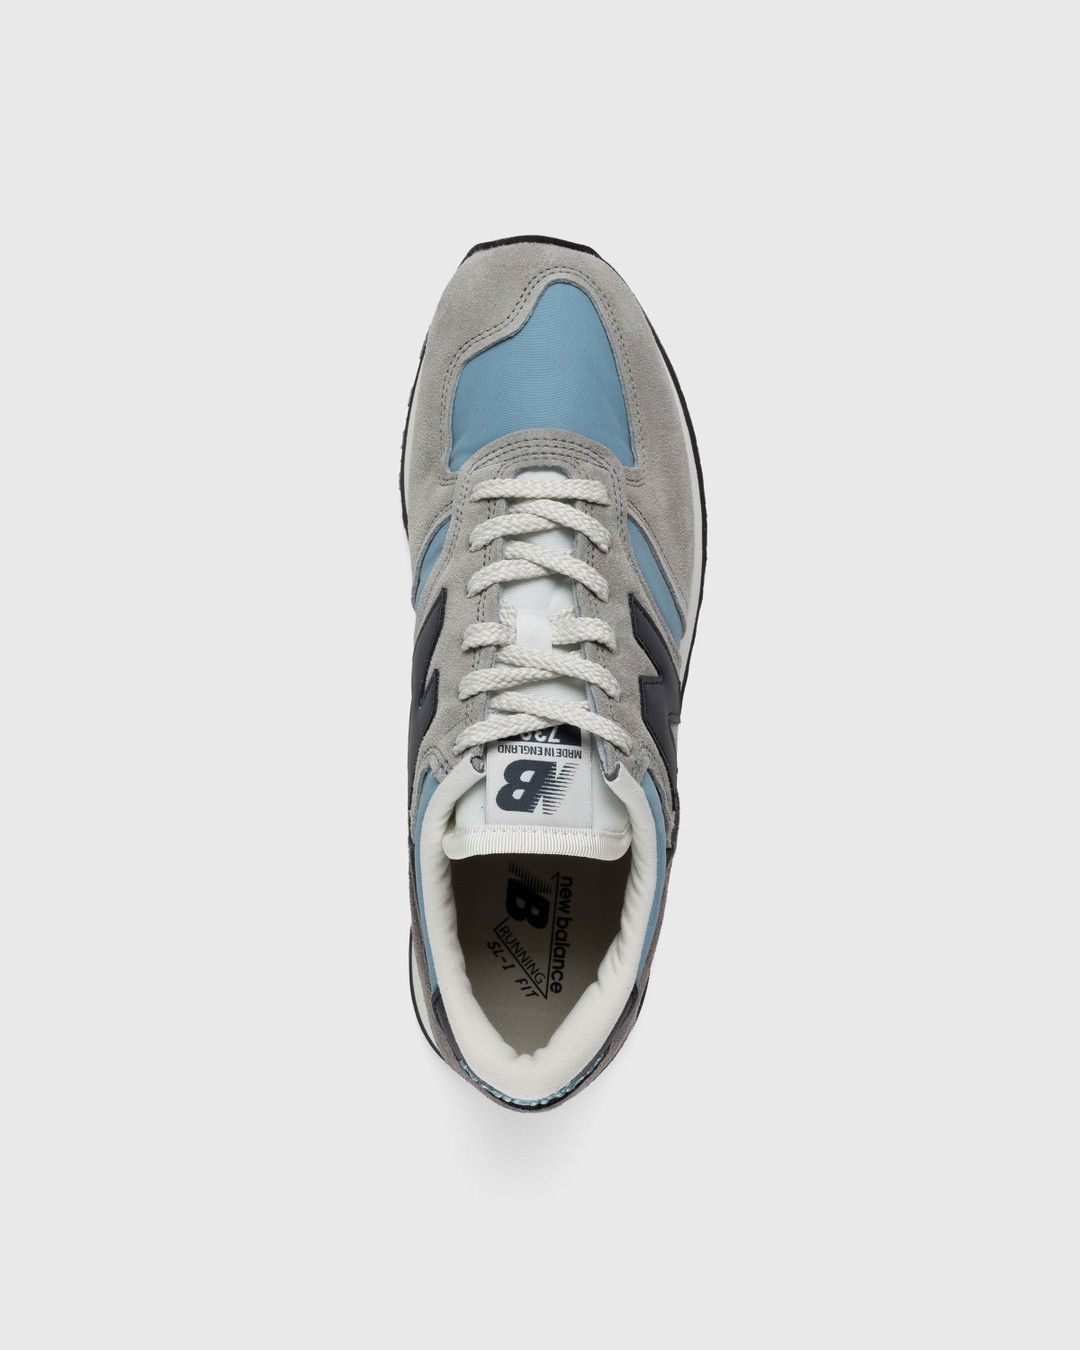 New Balance – M730GBN Grey/Blue - Sneakers - Grey - Image 5